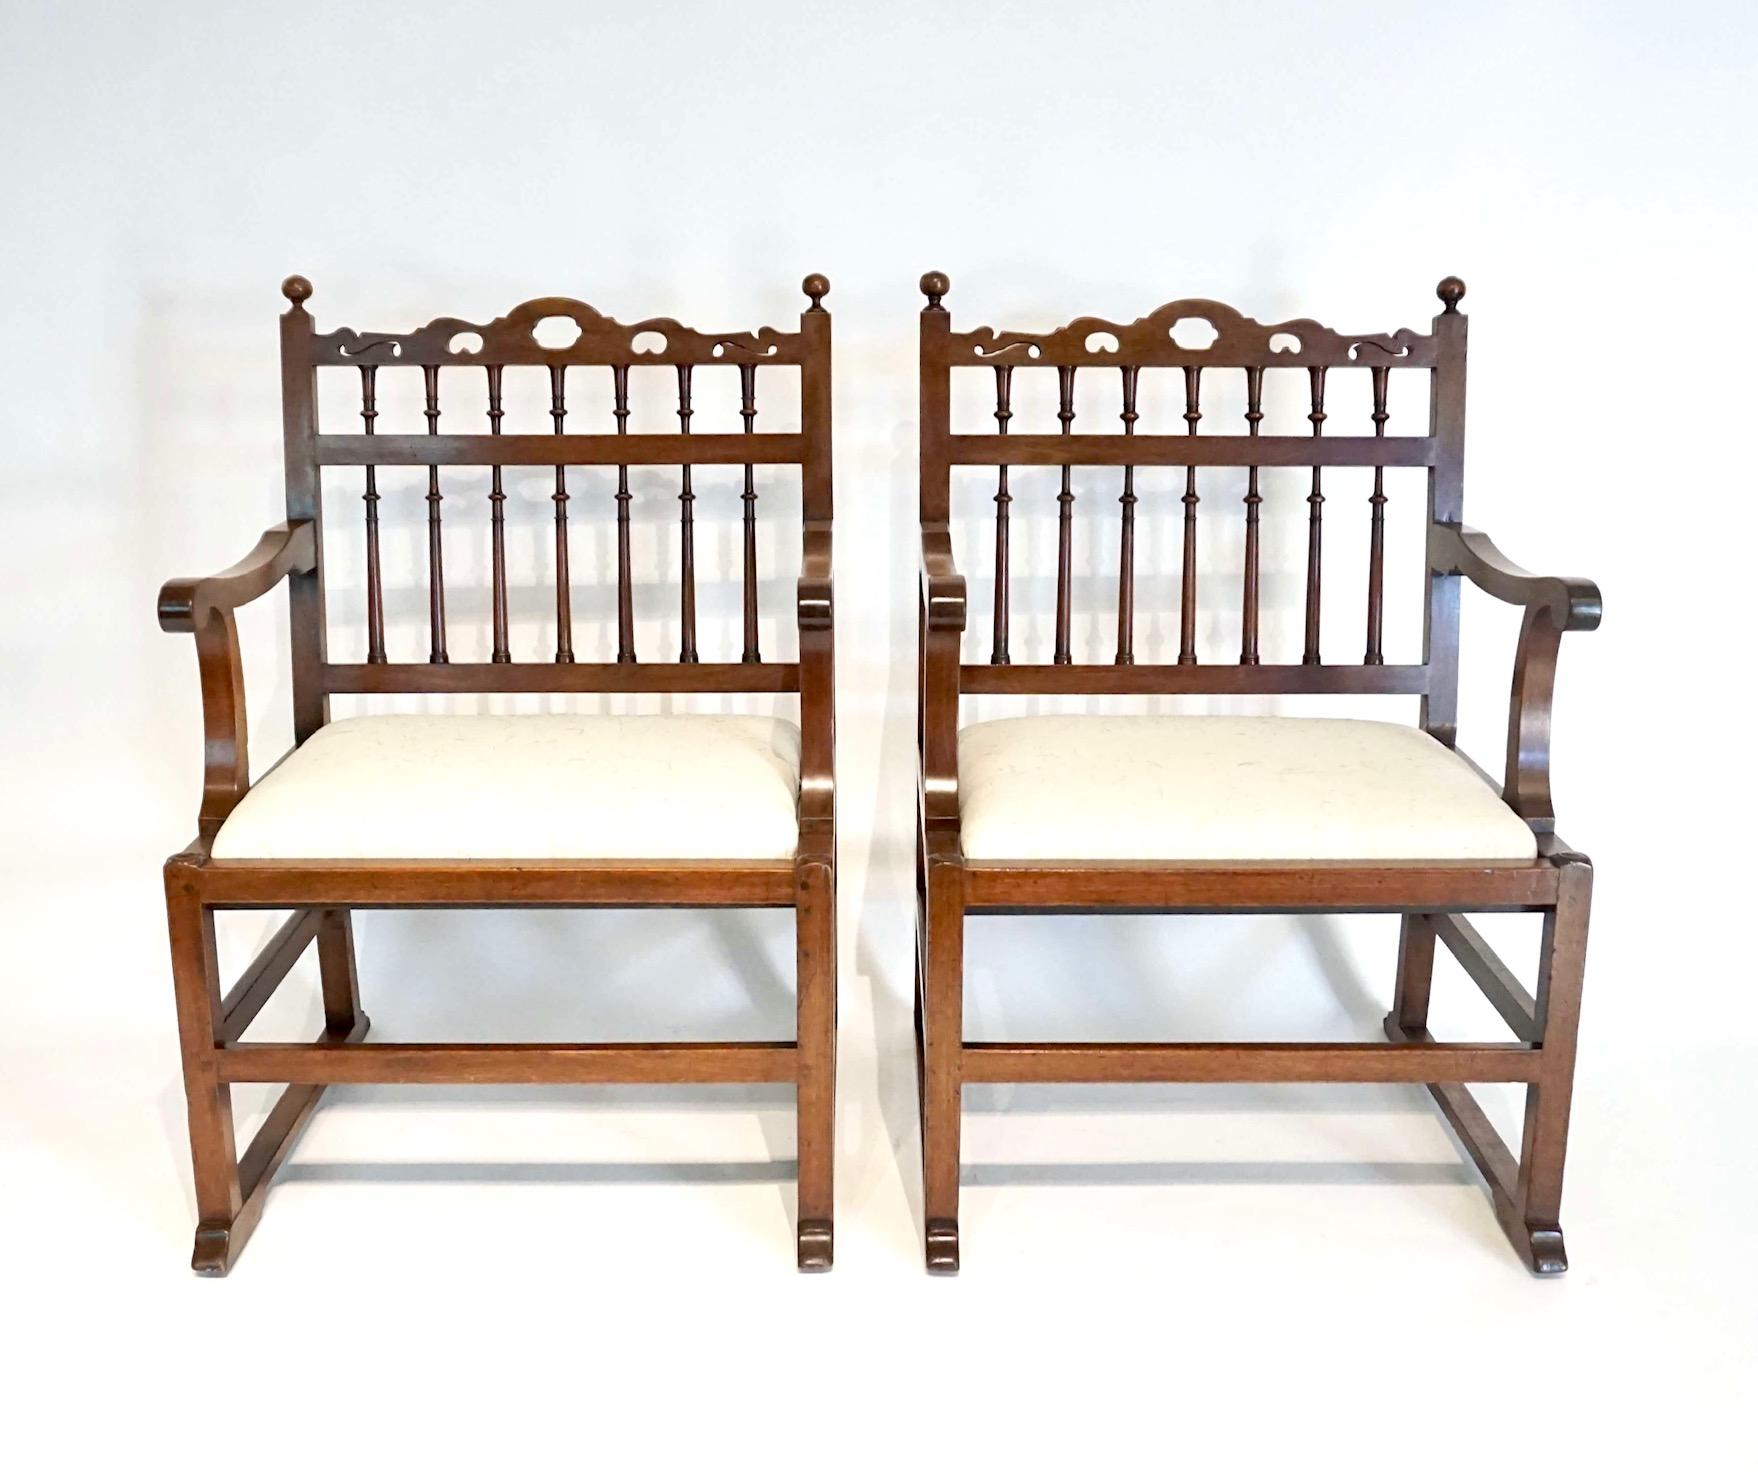 A Pair of Northern English Spindle-Back Arm Chairs, circa 1780 For Sale 8